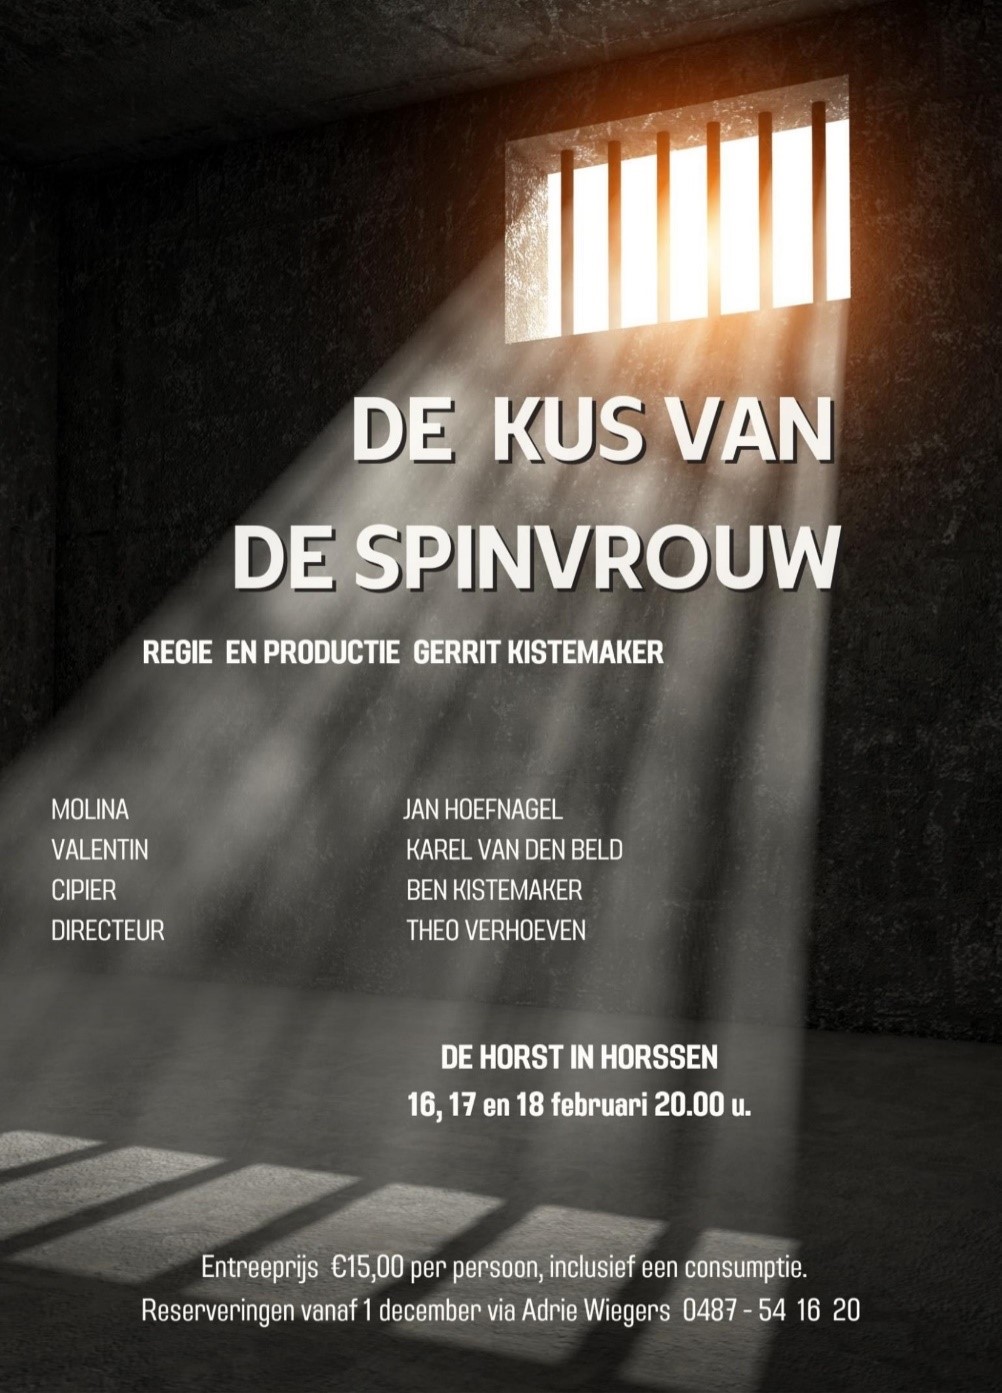 Spinvrouw